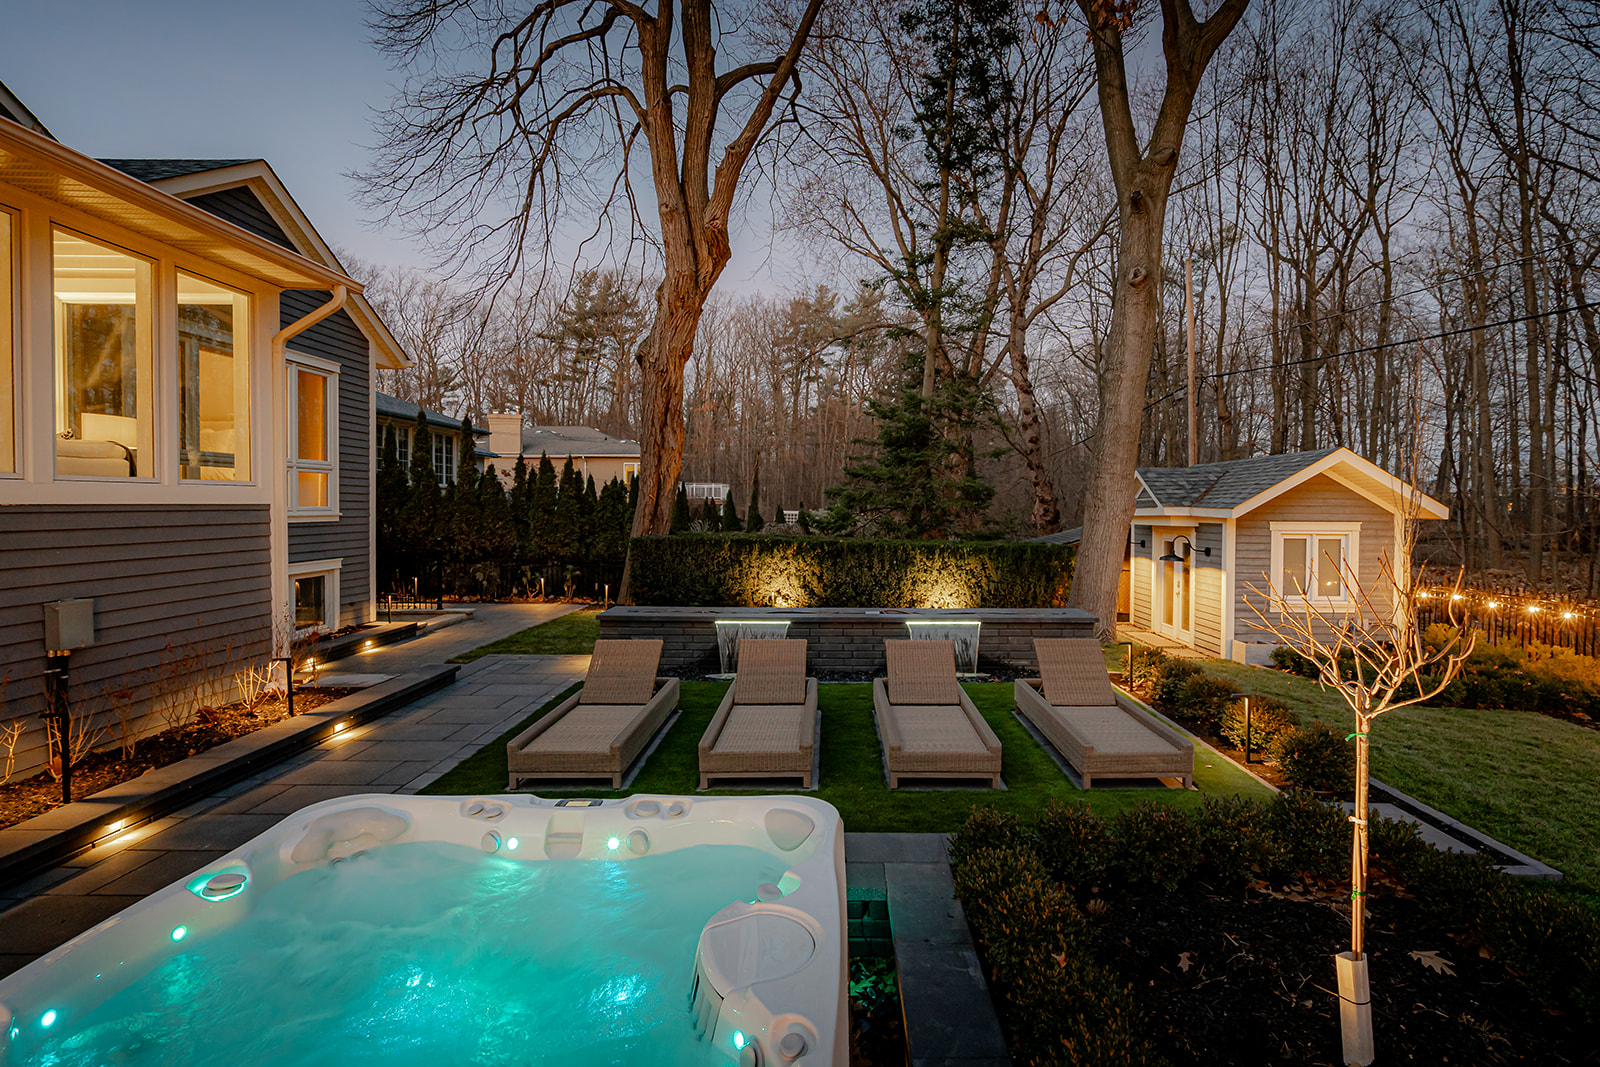 A jacuzzi with lounge chairs in the back yard.